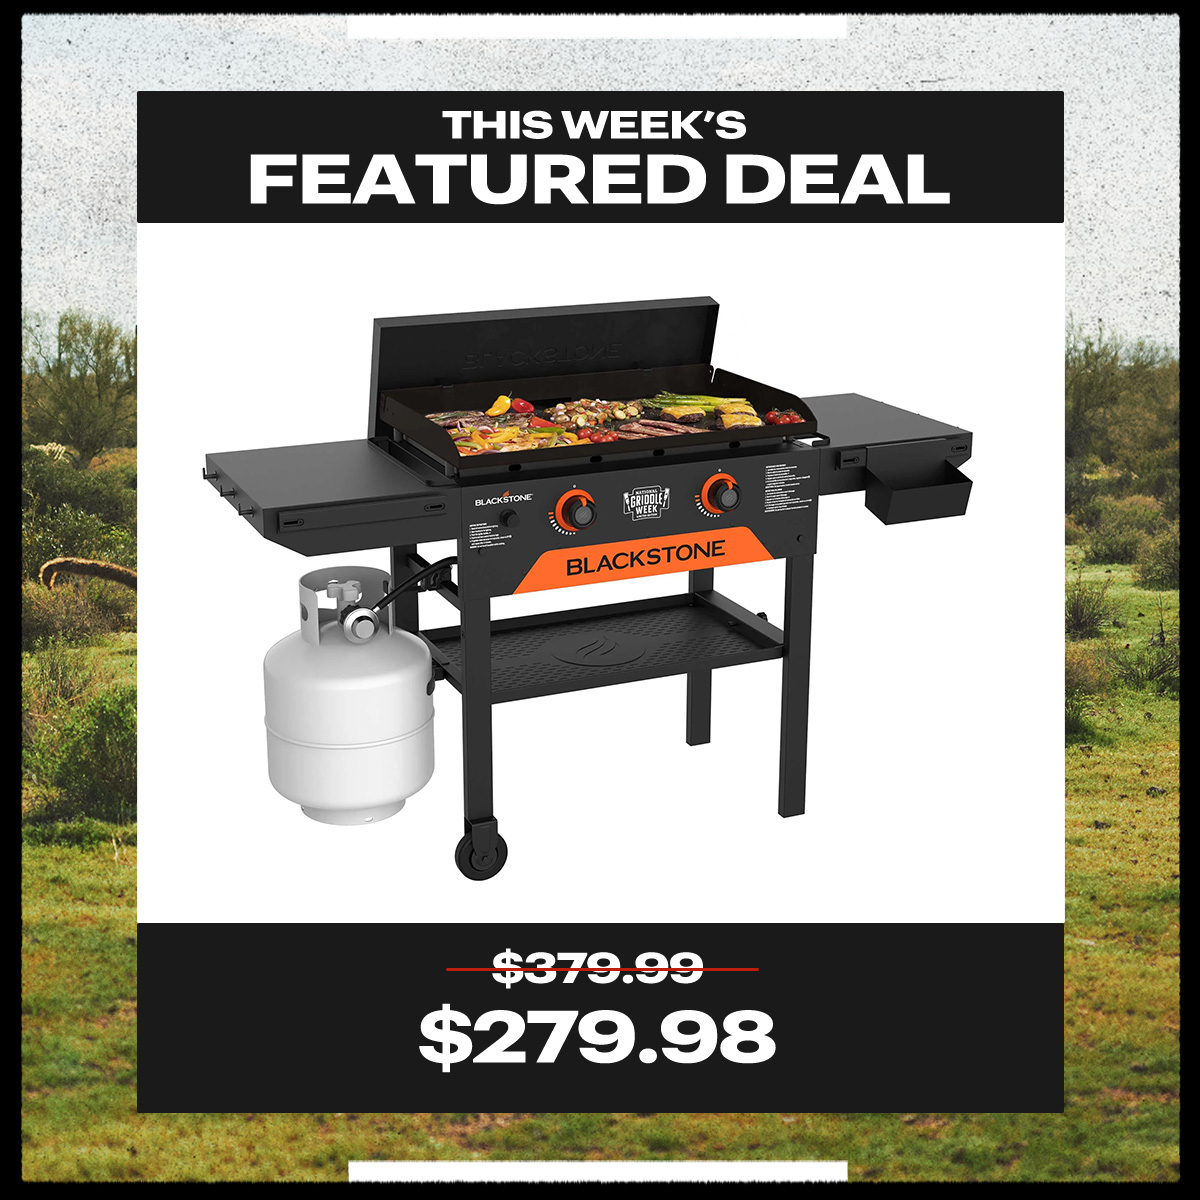  This week's featured deal. Was $379.99. Now $279.98.